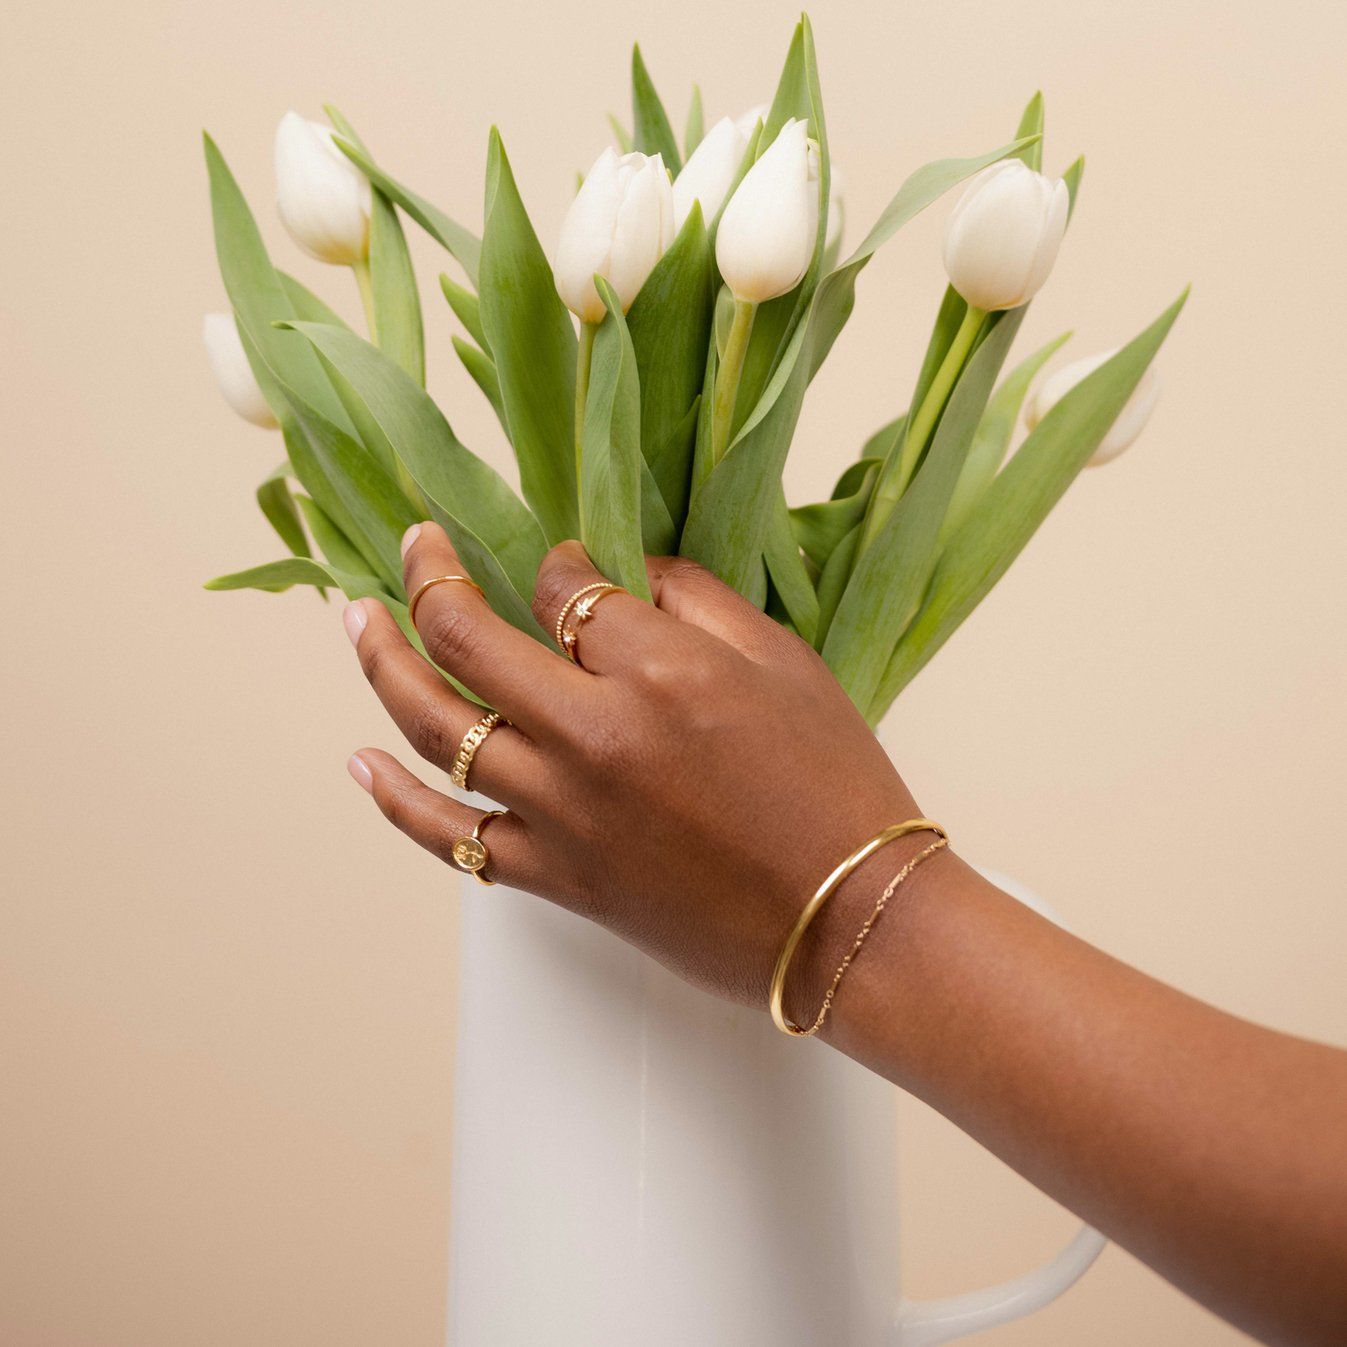 Dainty gold bracelets featuring the Linked Bracelet and Claw cuff Bracelet, Classic Bracelet Set handmade in America by Katie Dean Jewelry